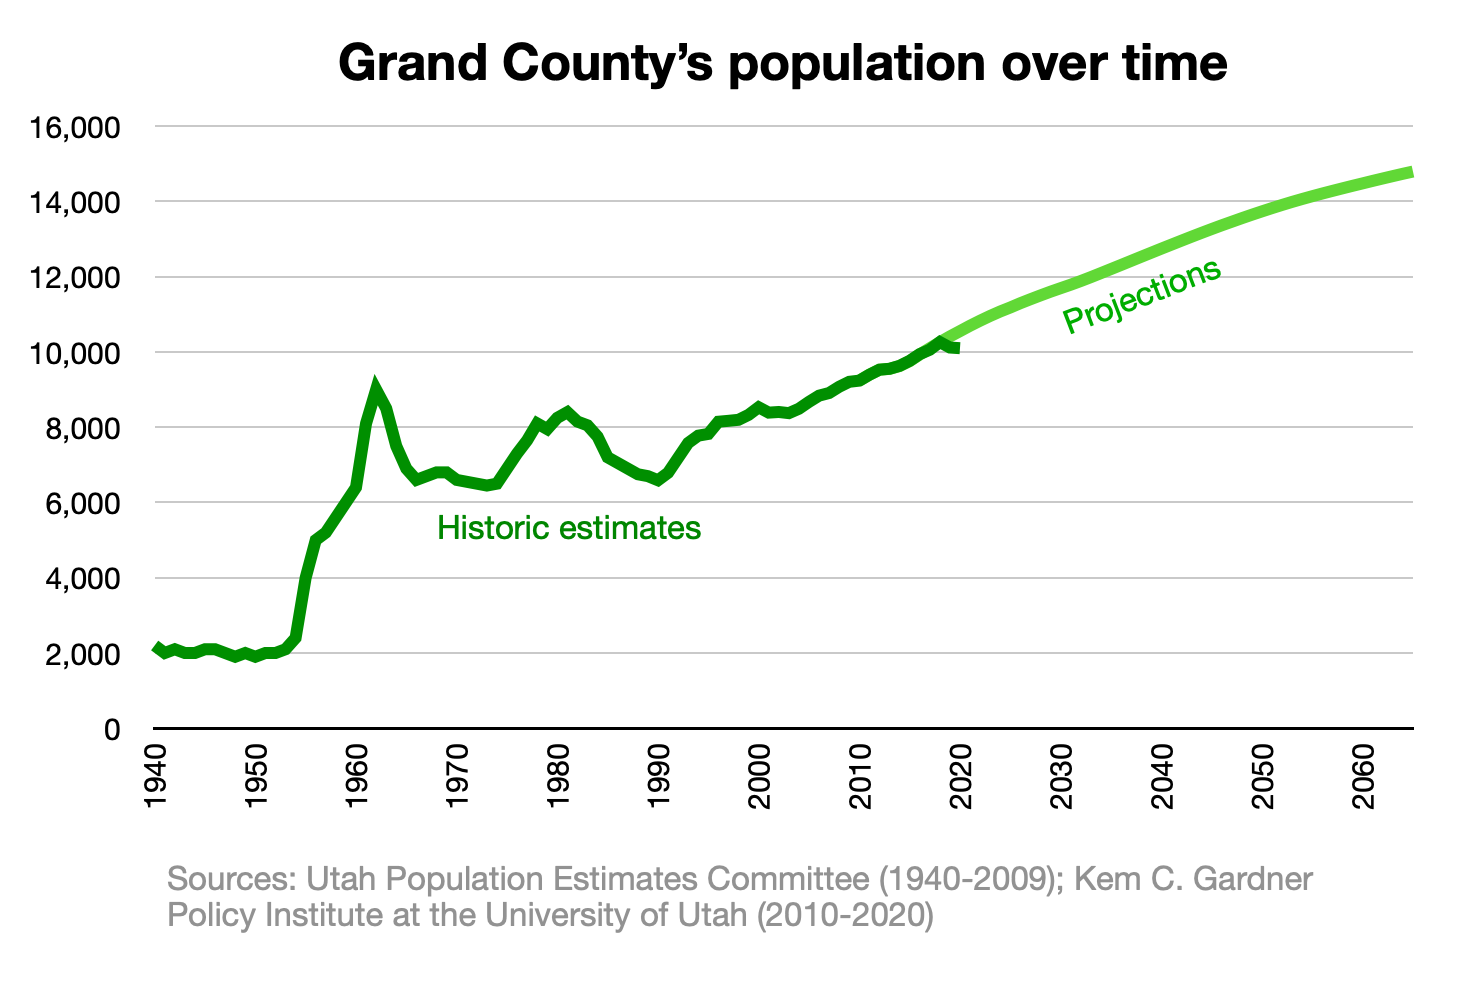 Plot showing population growth in Grand County projected to continue after 2018 despite two consecutive years of decline, with the growth projected to slow over time